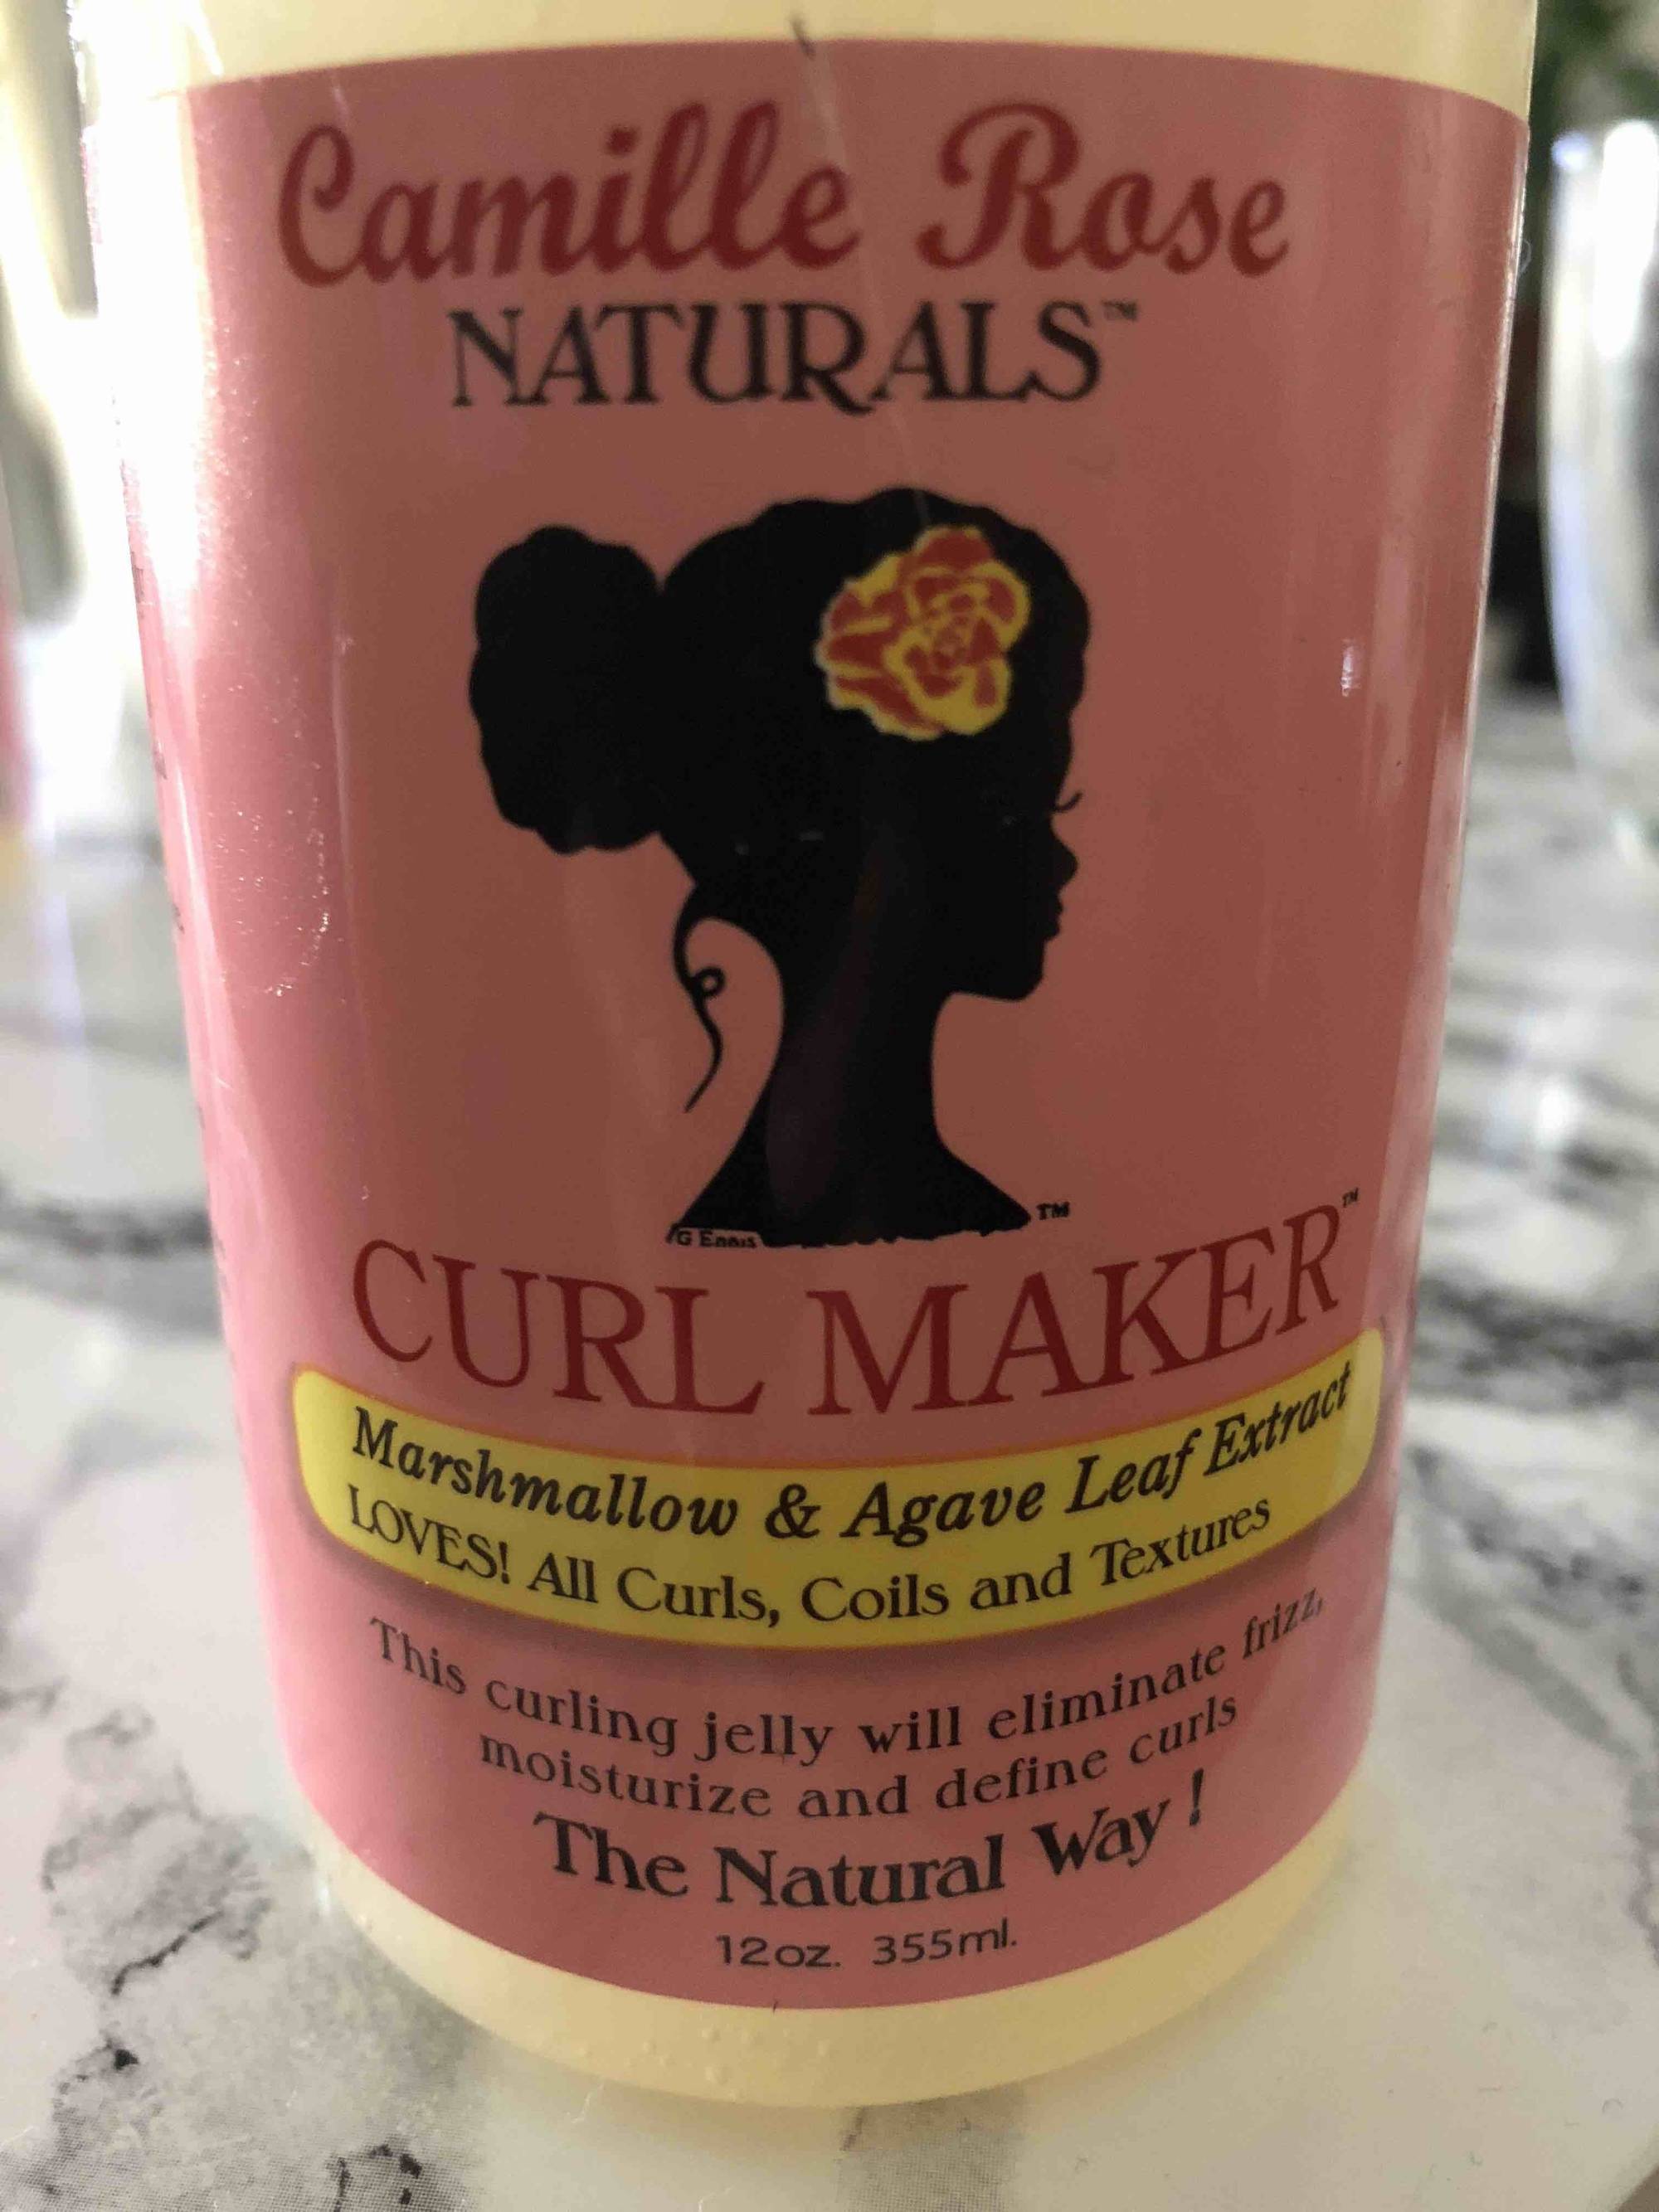 CAMILLE ROSE NATURALS - Curl maker marshmallow & agave leaf extract